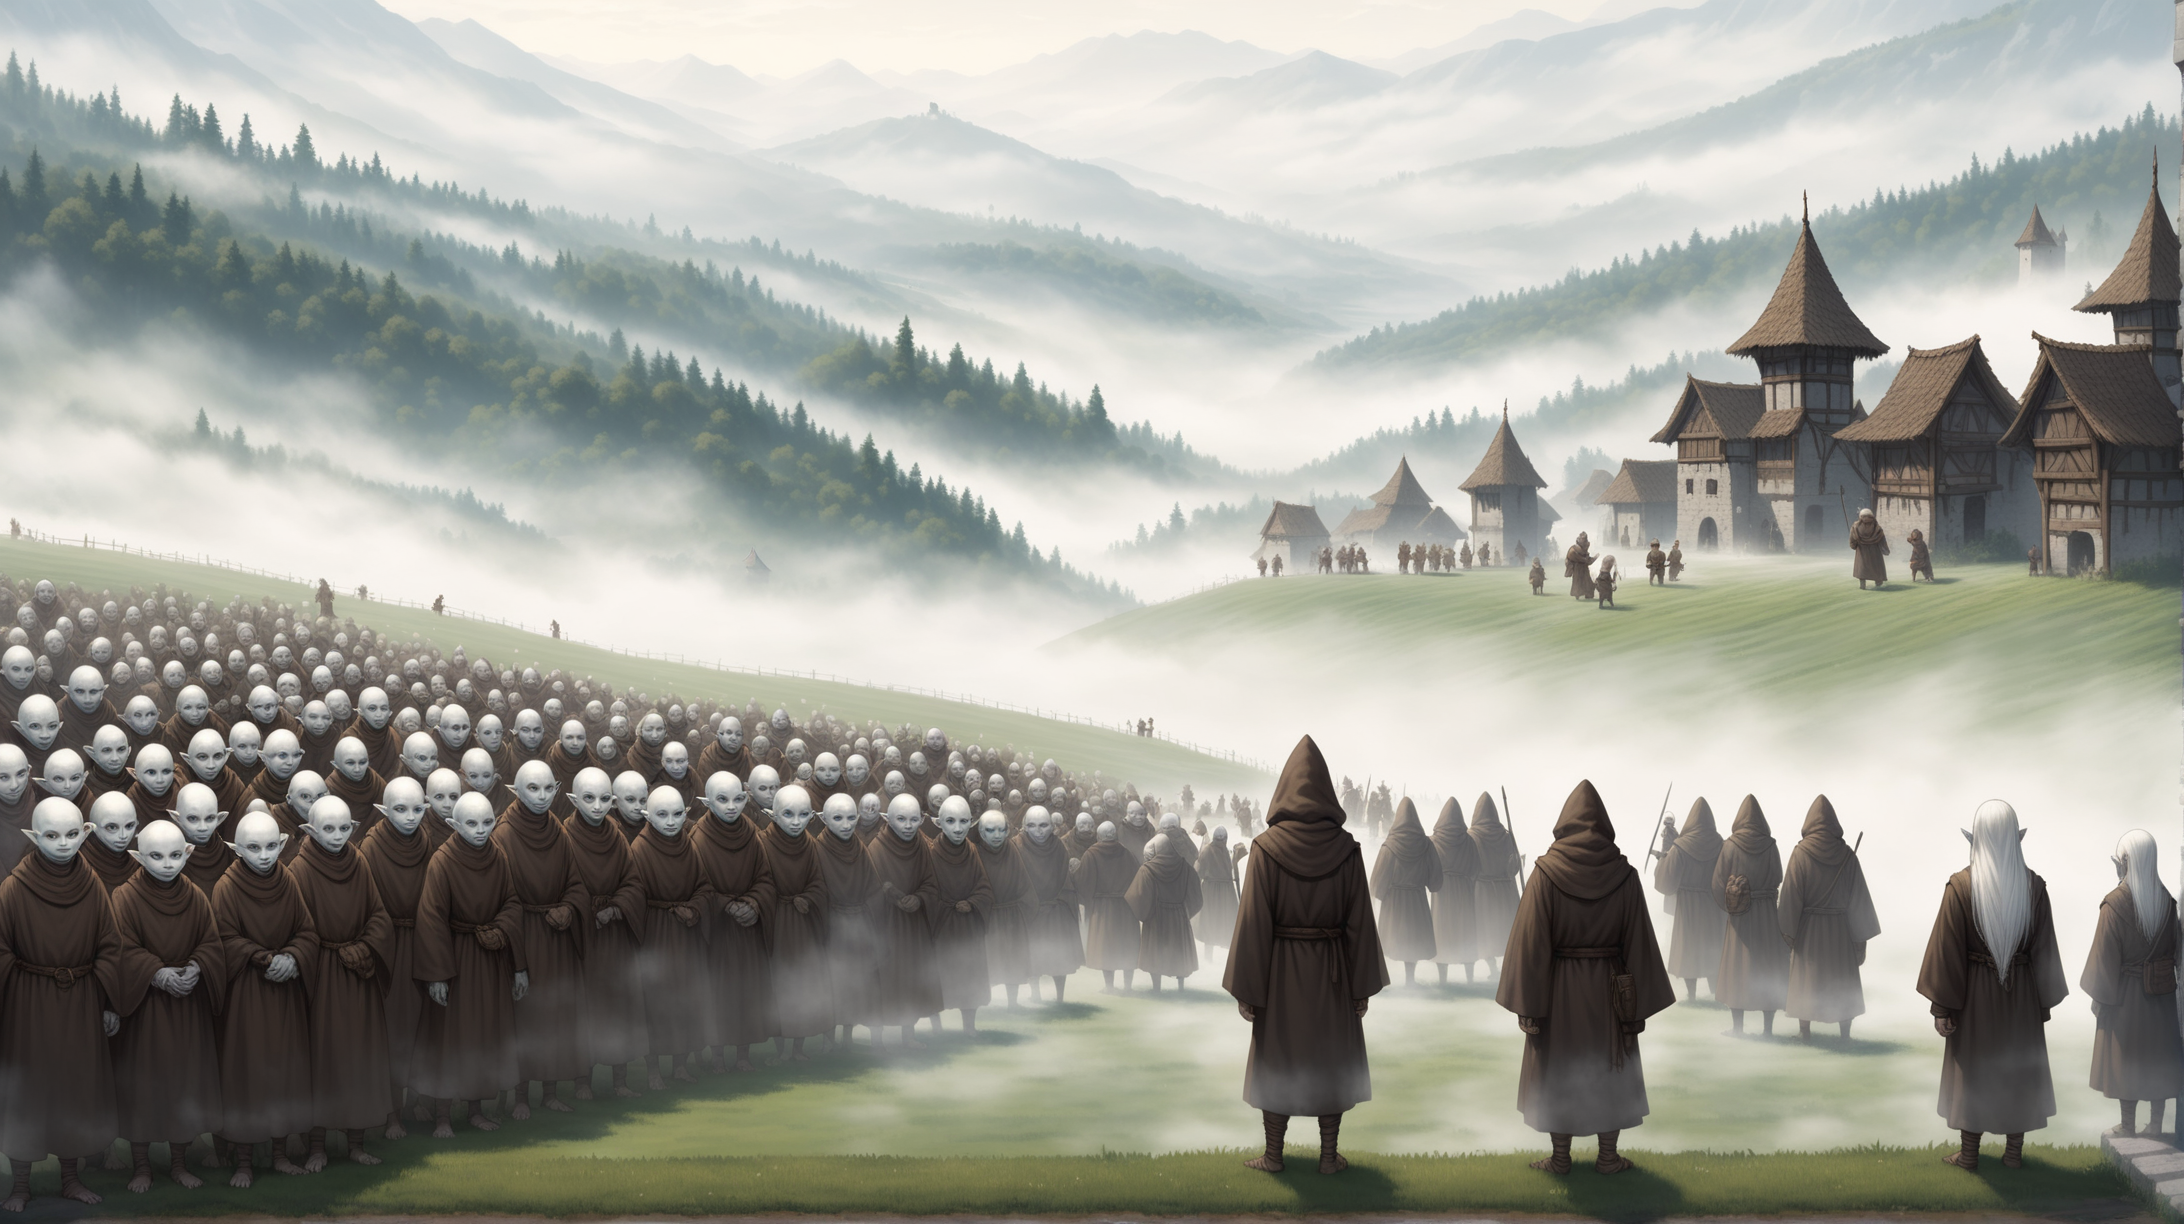 tribe of tiny short white goblins with full chalk white skin, thieves and monks, short boys and short girls with long hair, countryside white fog, Medieval fantasy